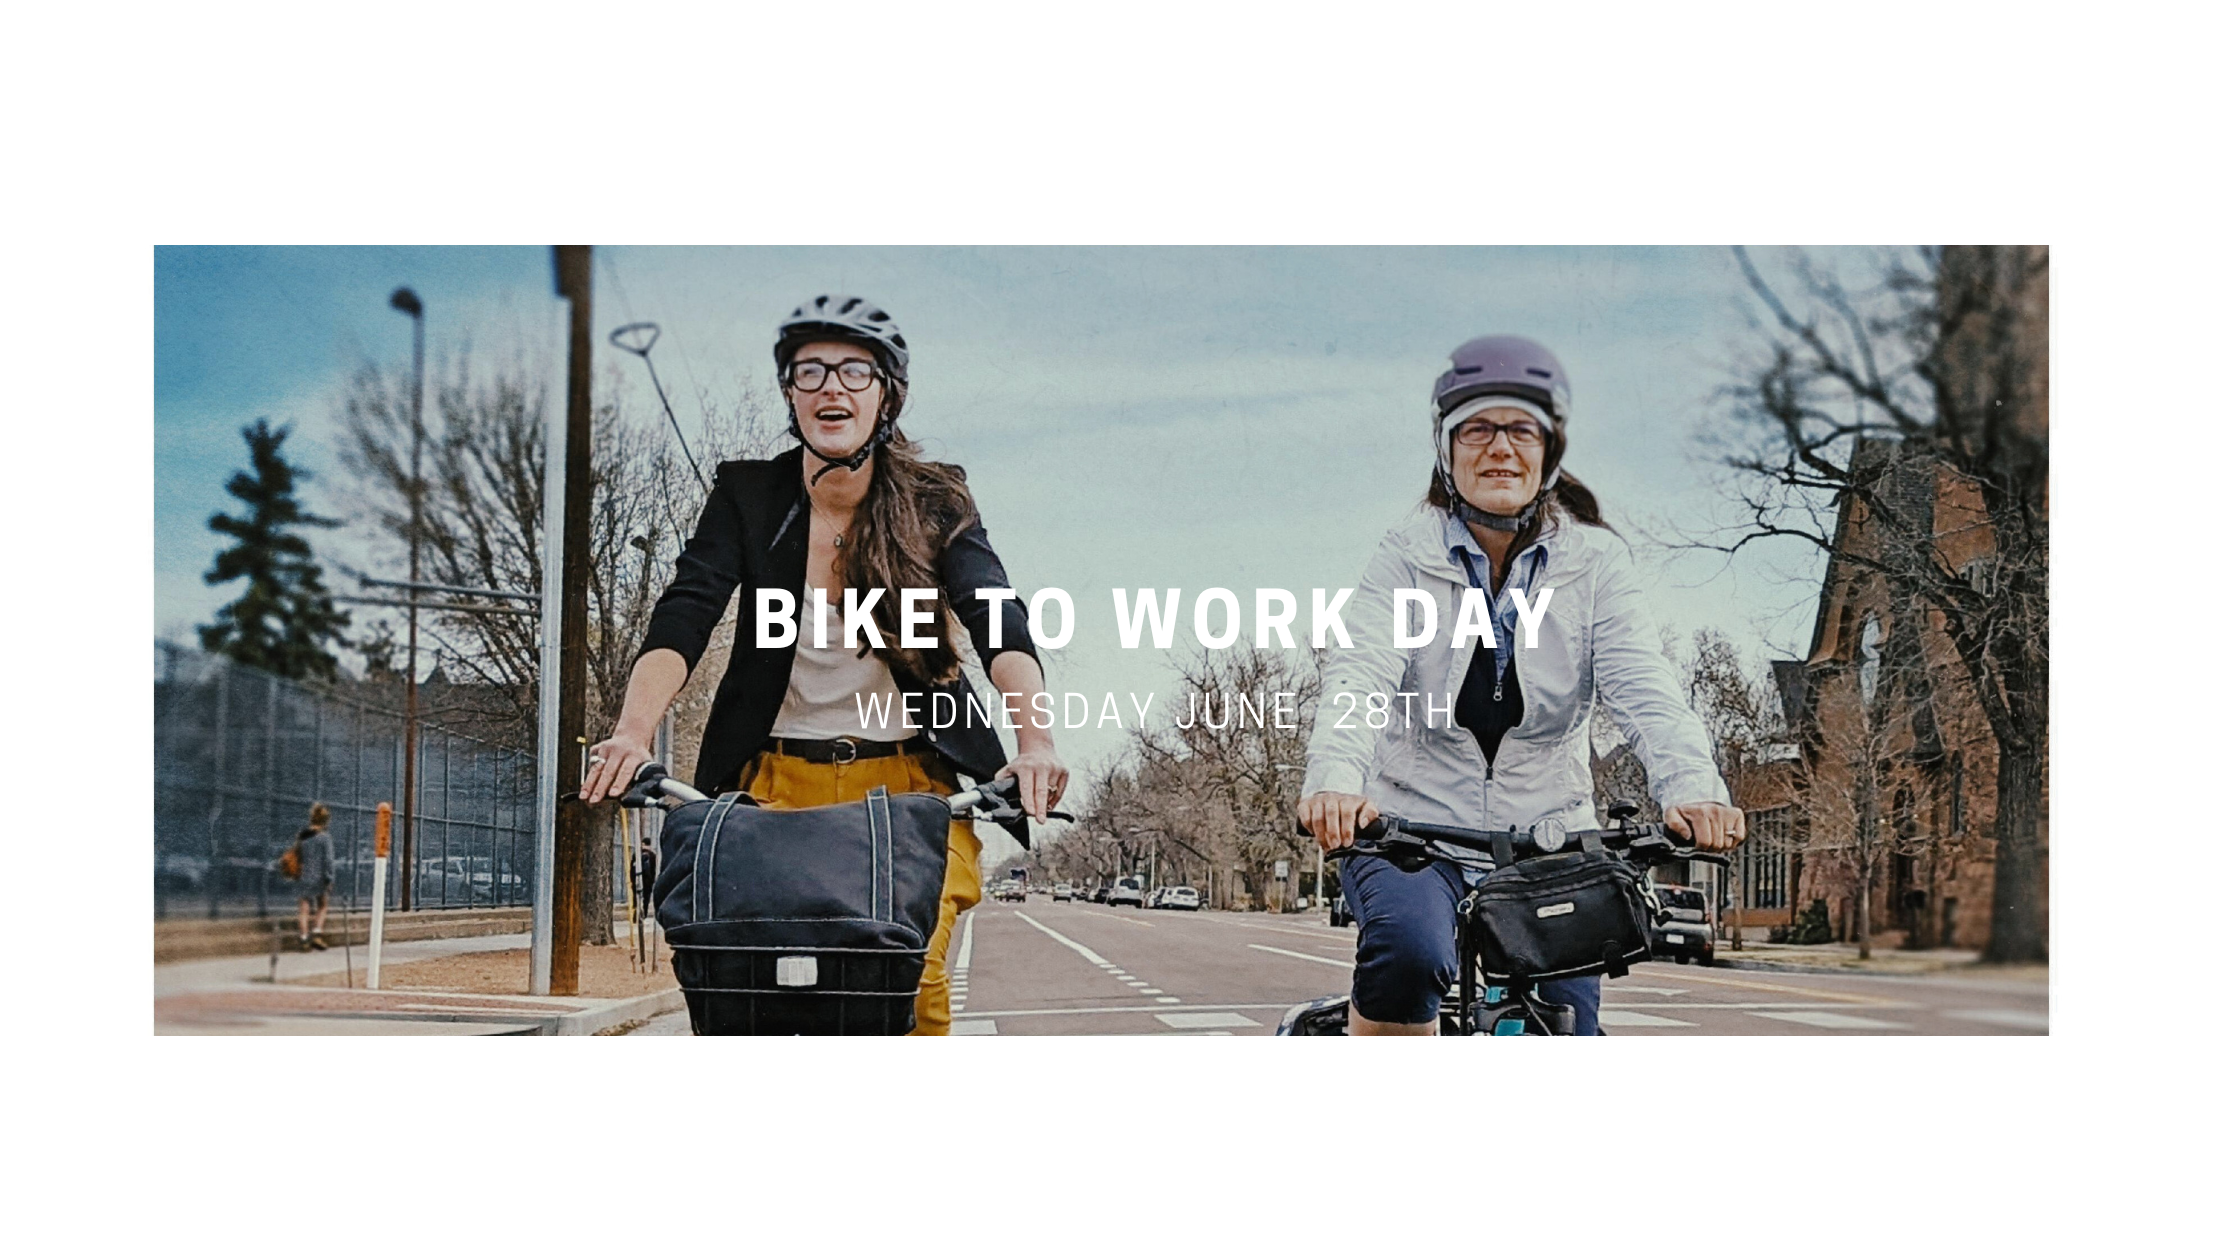 Join Your Neighbors For Colorado Bike To Work Day June 28th